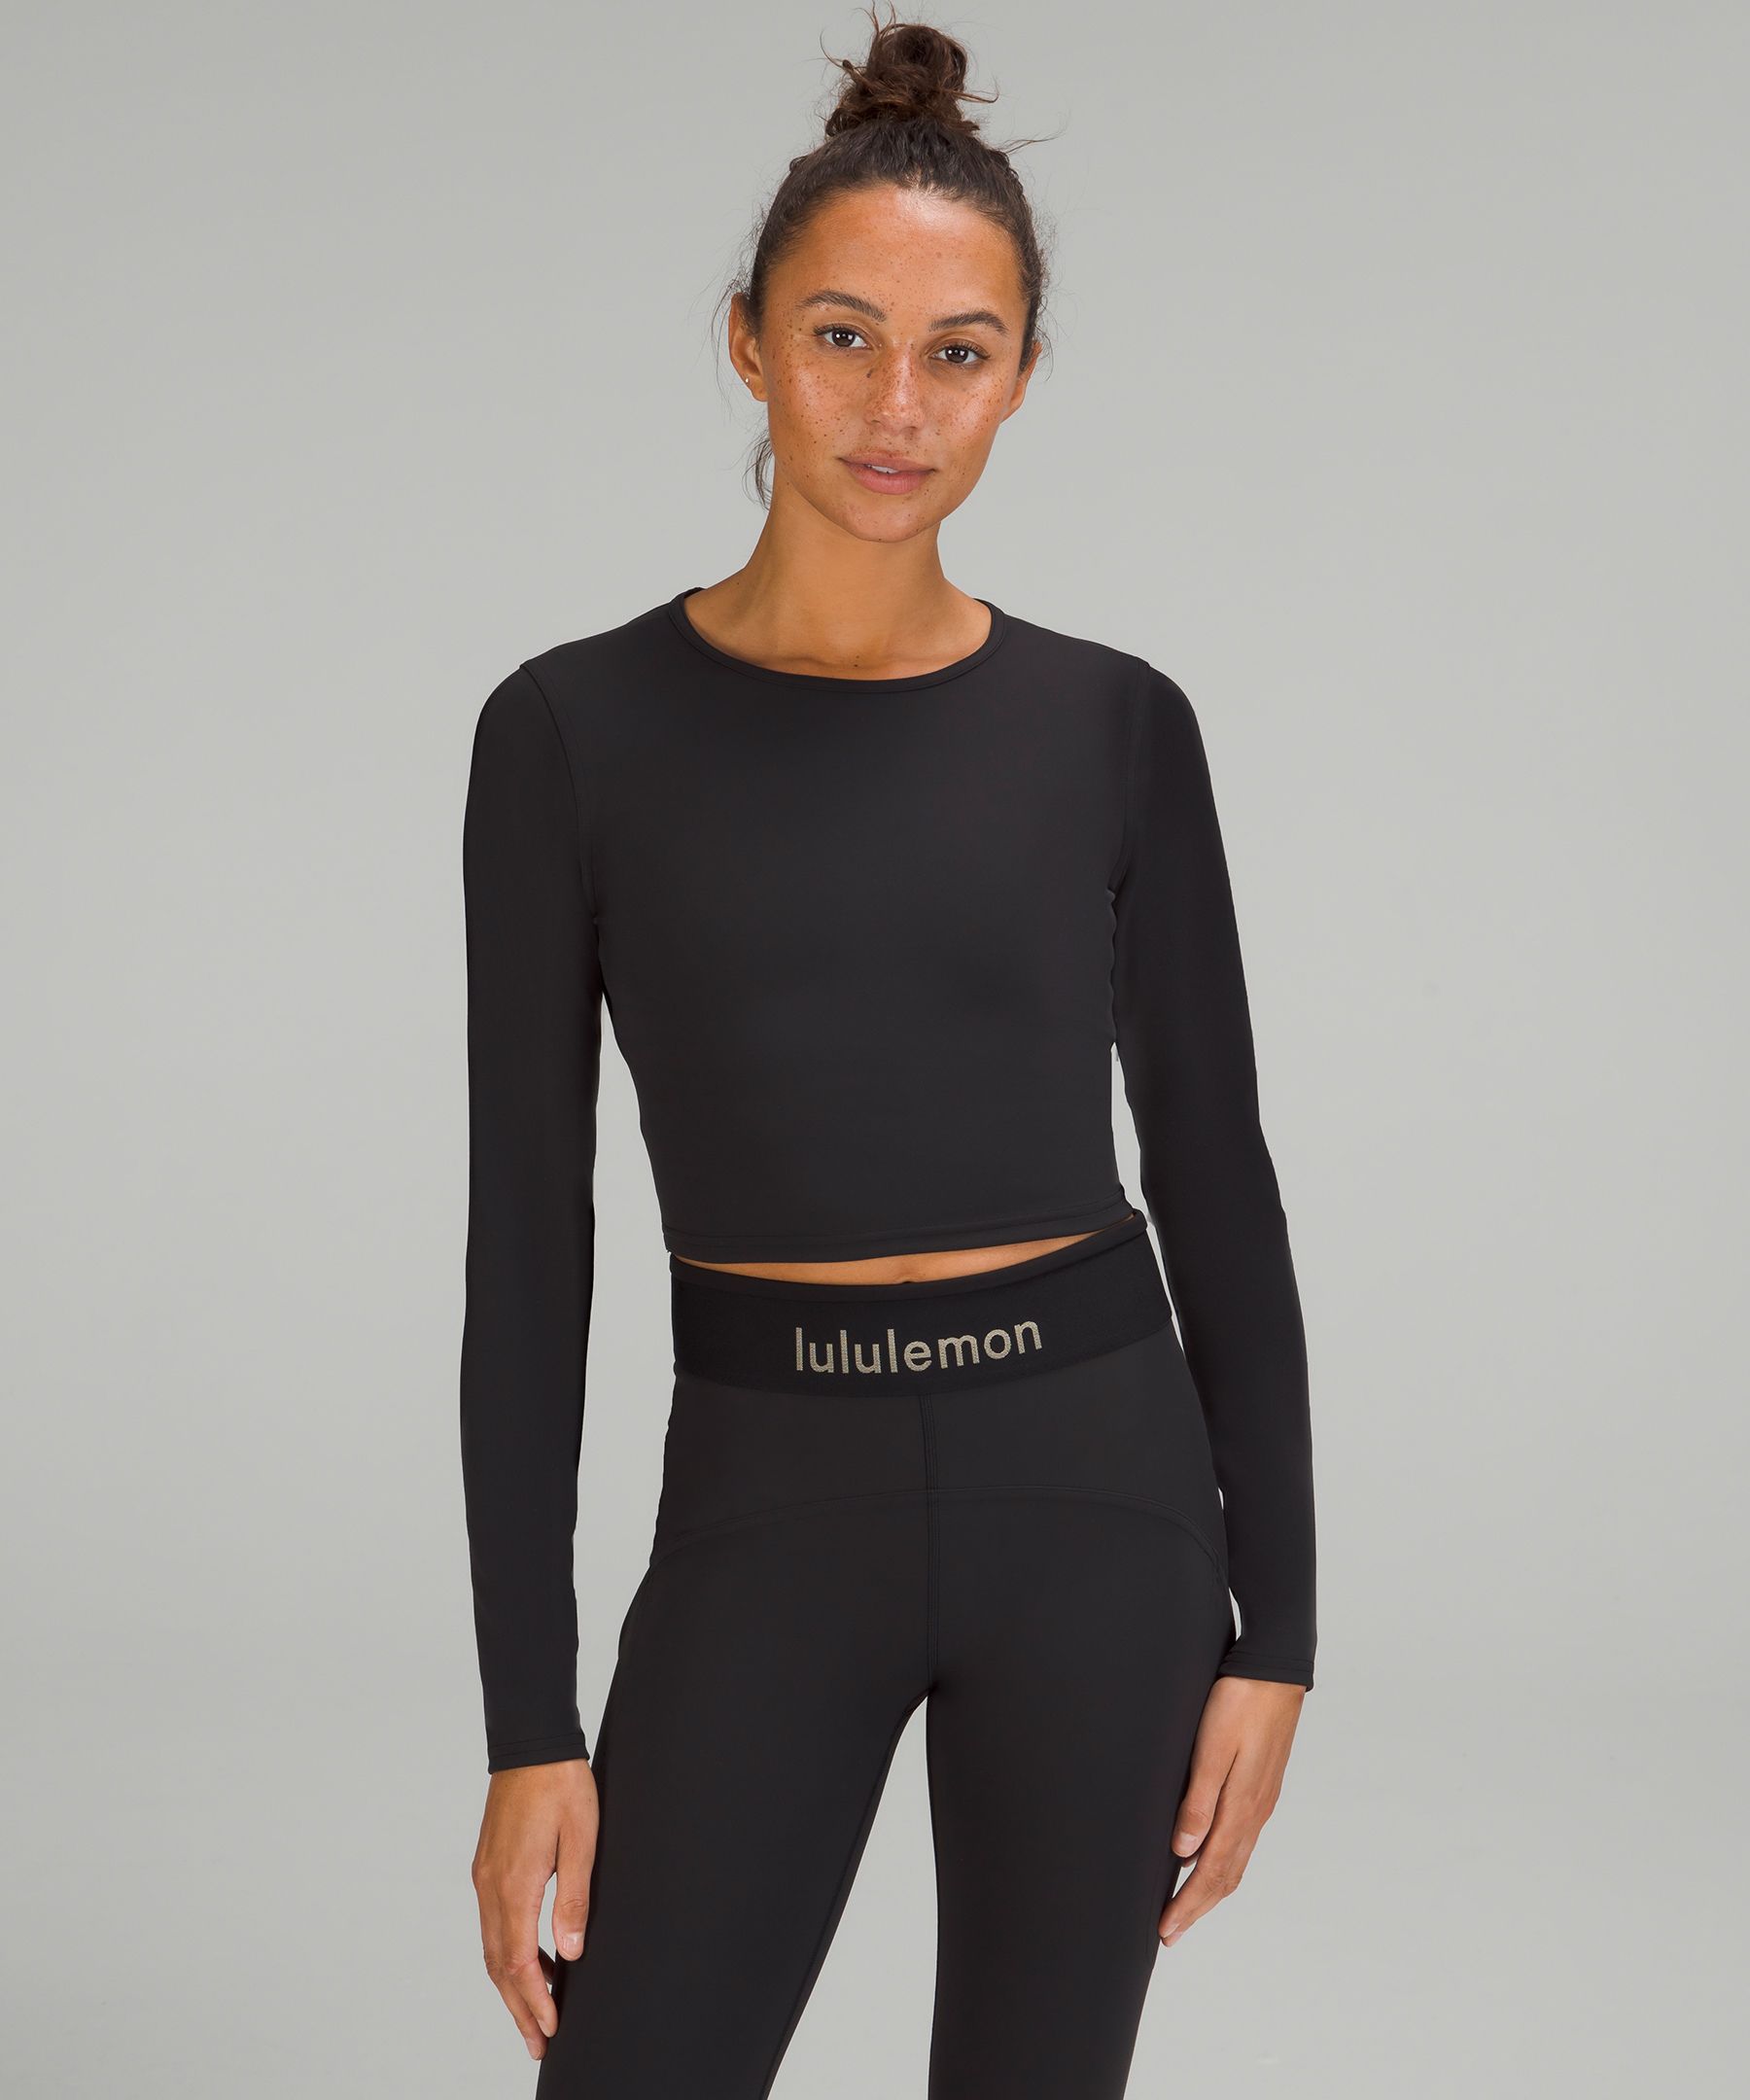 lululemon's launch of their fastest drying fabric: Everlux